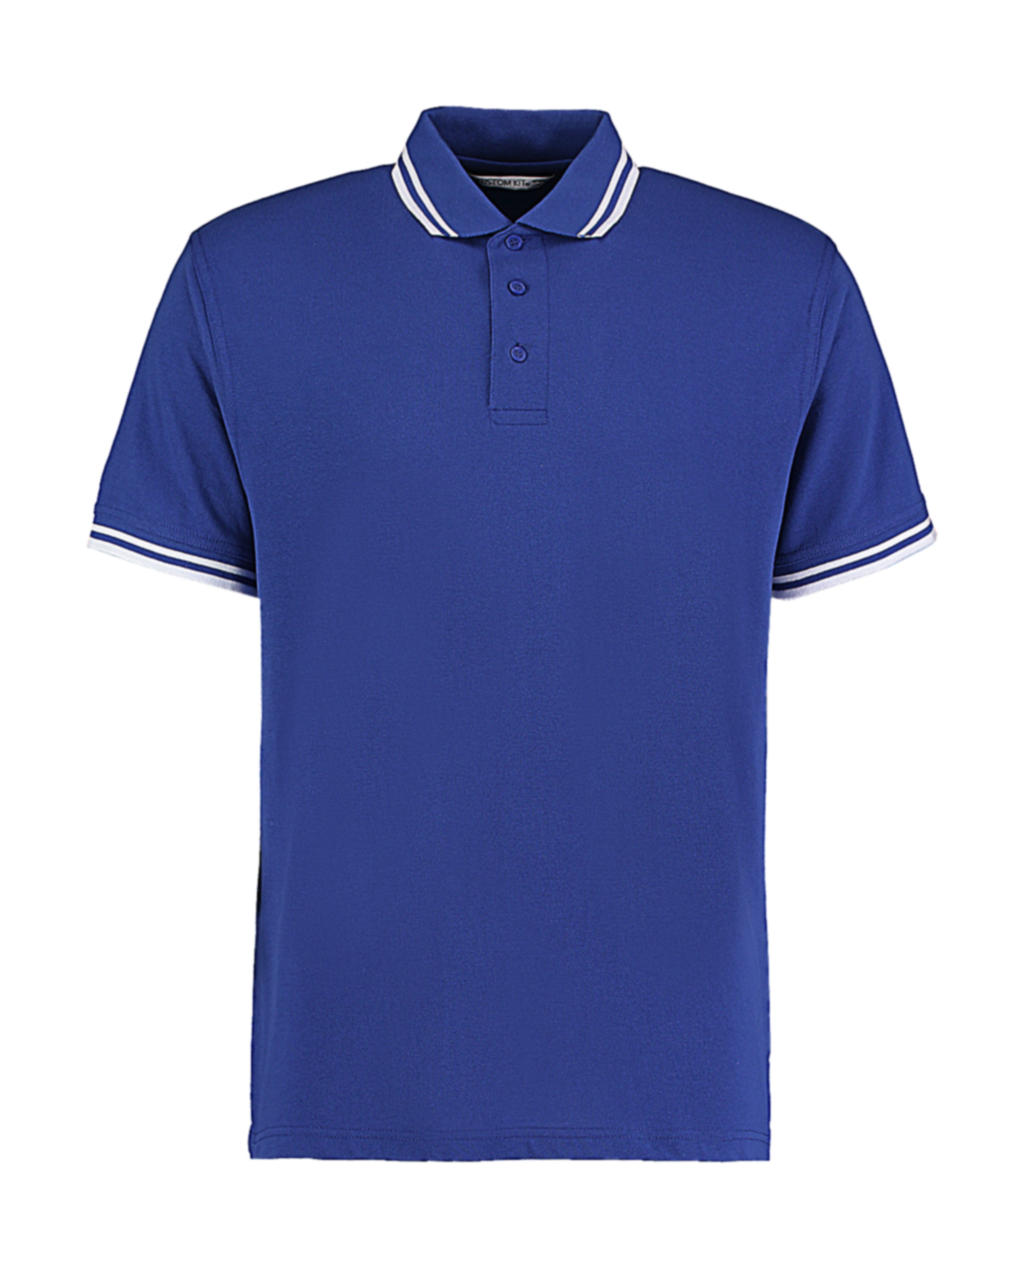  Classic Fit Tipped Collar Polo in Farbe Royal/White